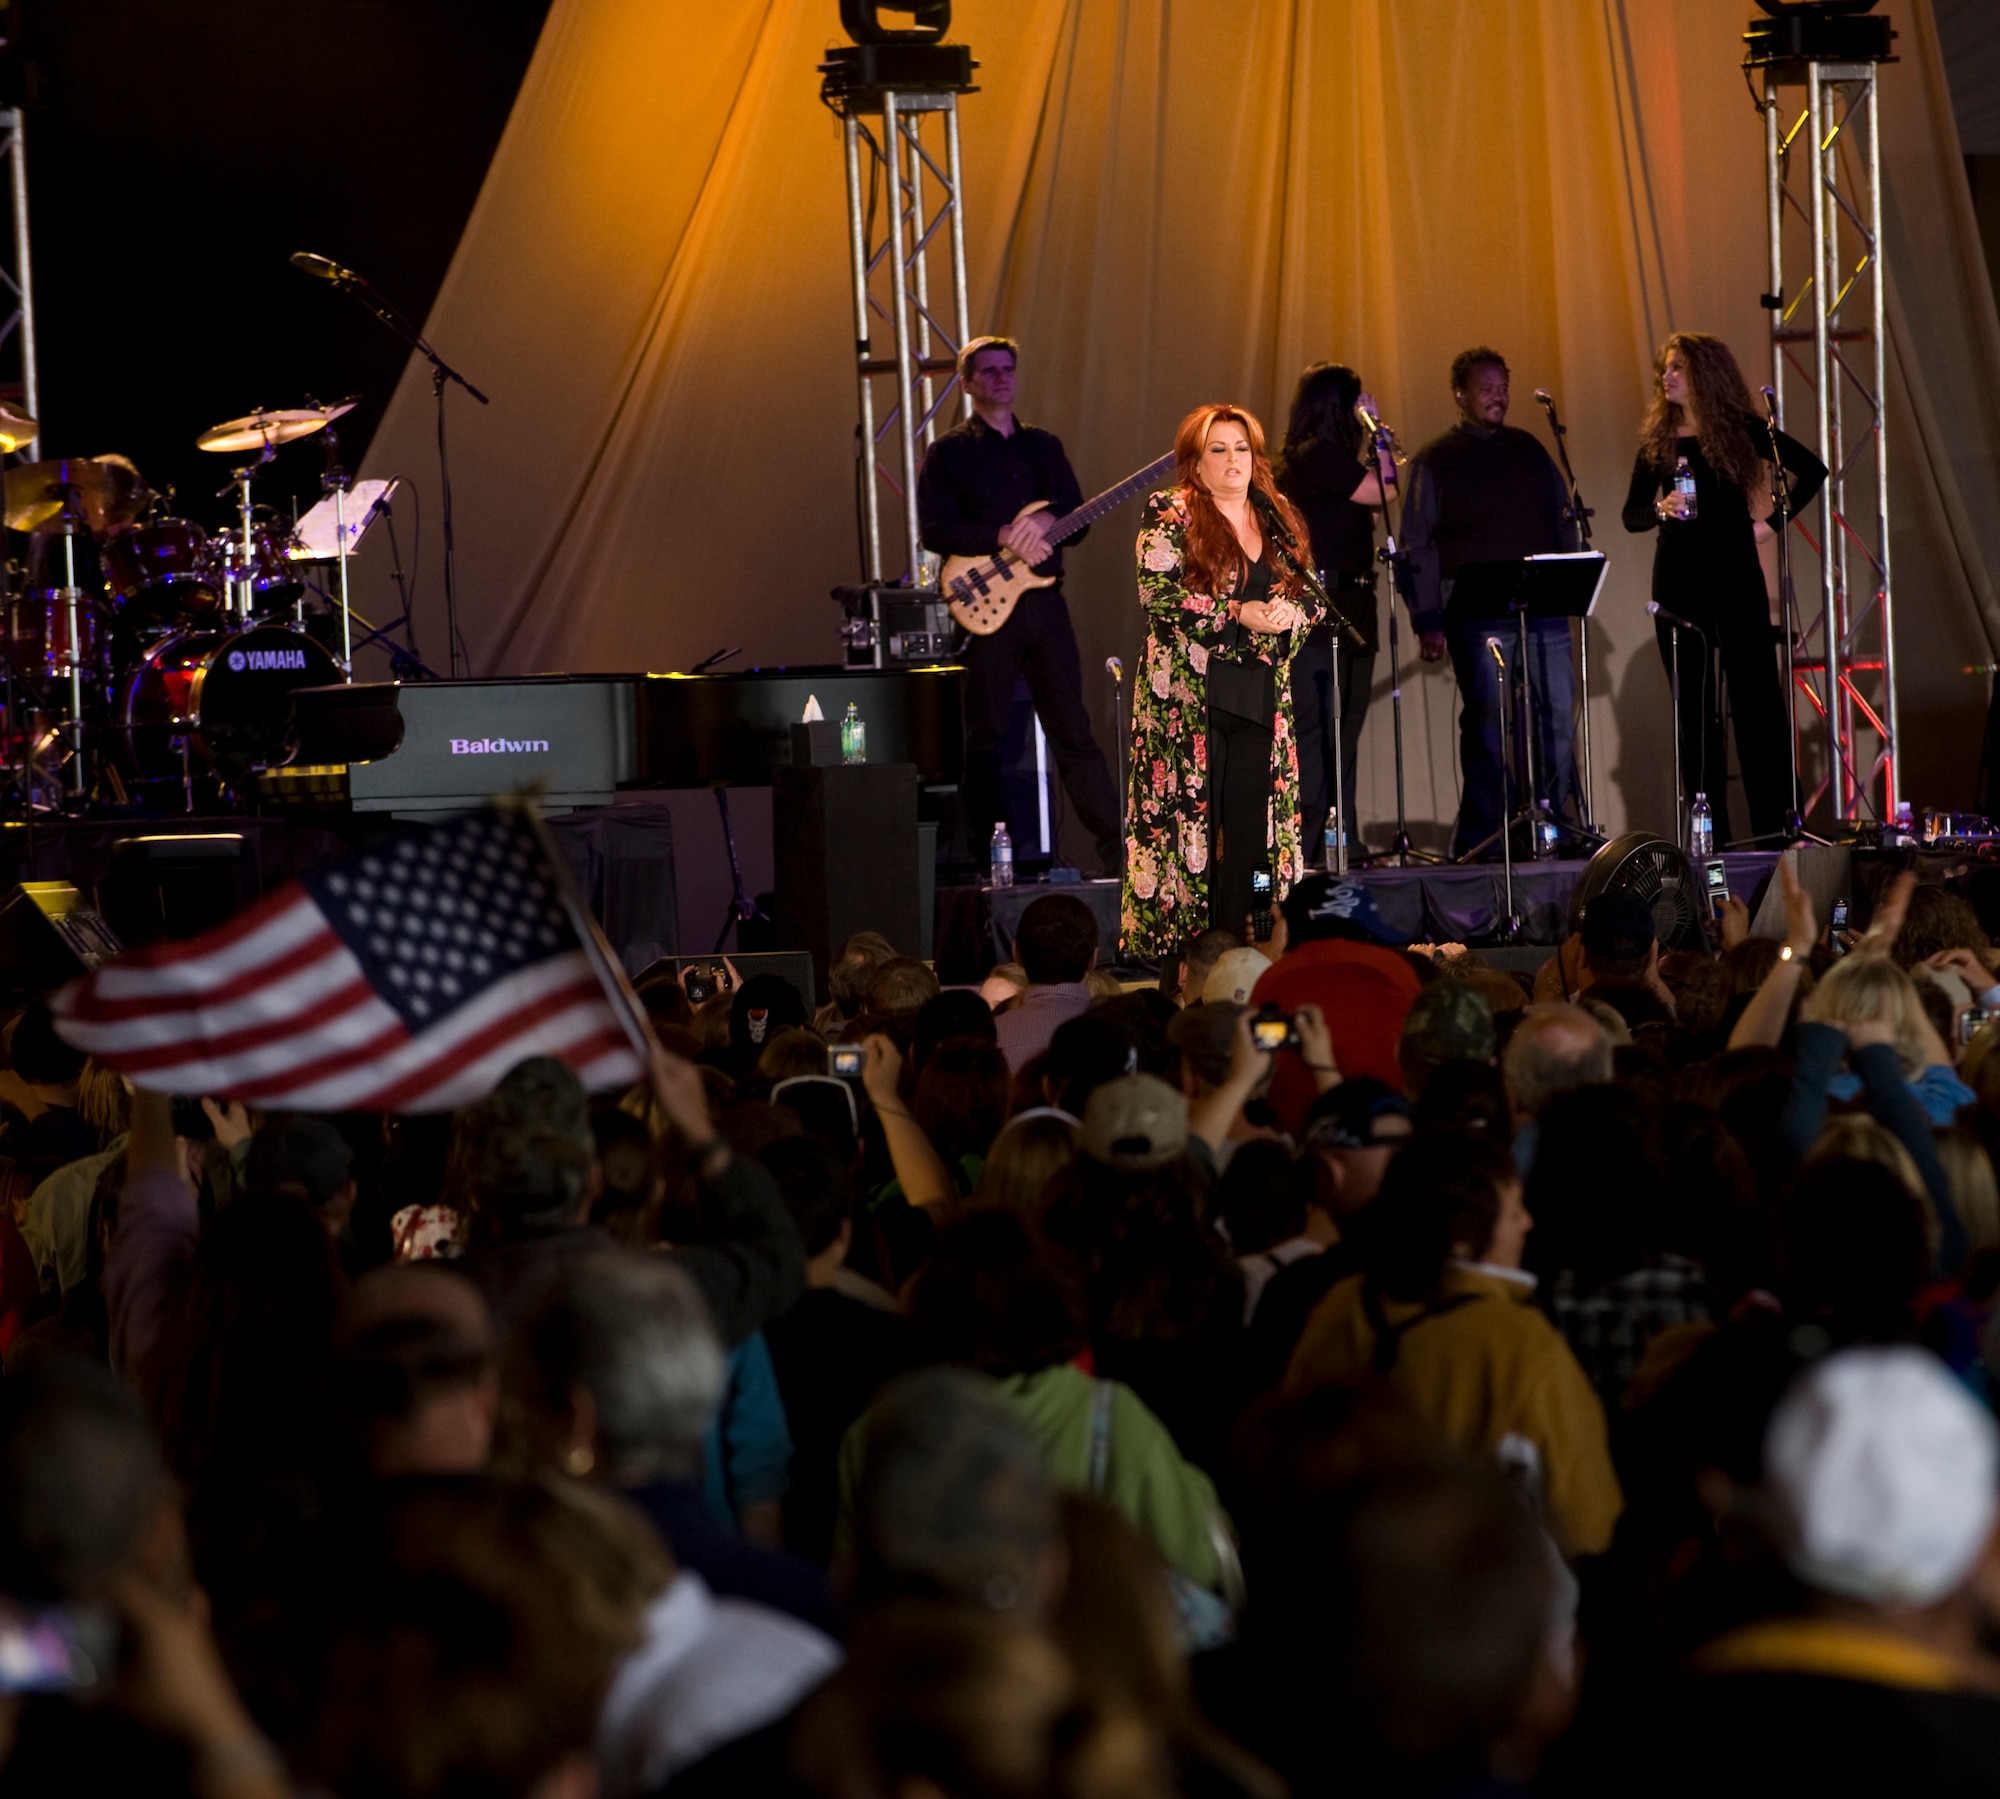 ELMENDORF AIR FORCE BASE ALASKA -Country Singer Wynonna Judd performs a free concert for the members of the military and Alaska crowd in Hanger 2 during "Alaska's Concert for the Military" June 27, as part of the Alaska's 50th Statehood celebration. (U.S Air Force photo byTech. Sgt. Alan Port)